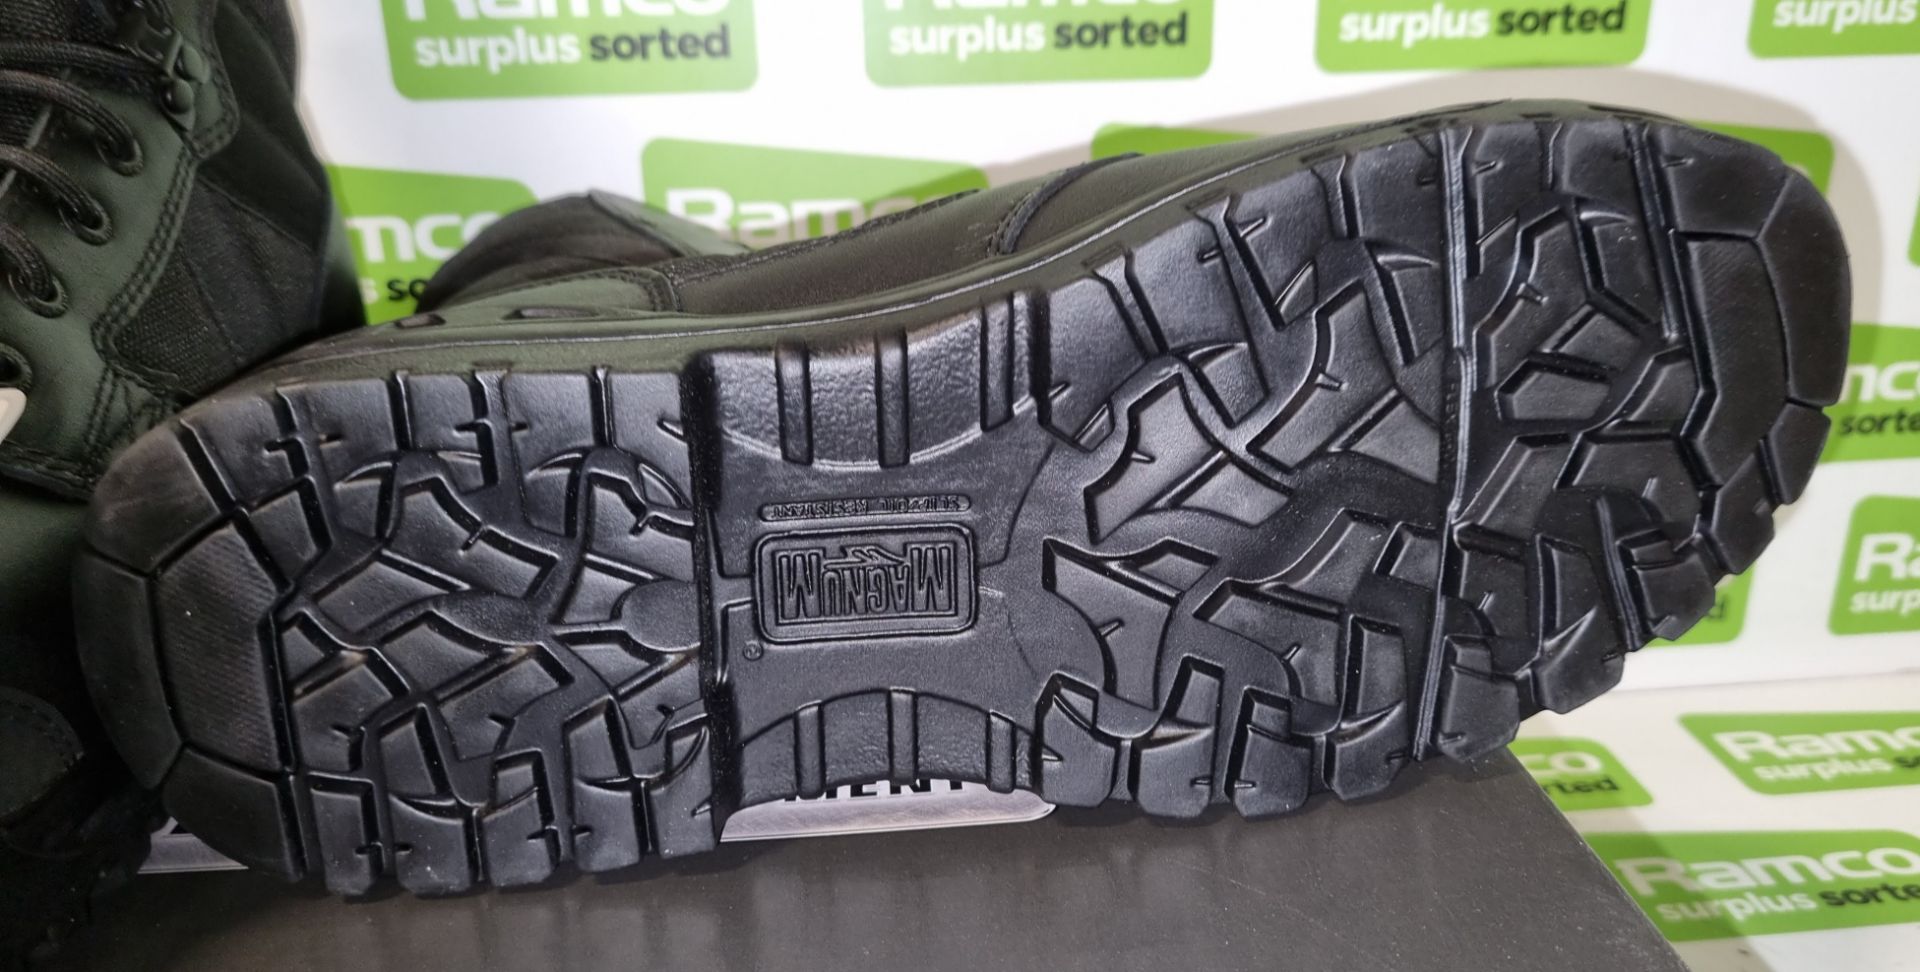 10x pairs of Magnum hot weather boots - size 10M - Image 3 of 5